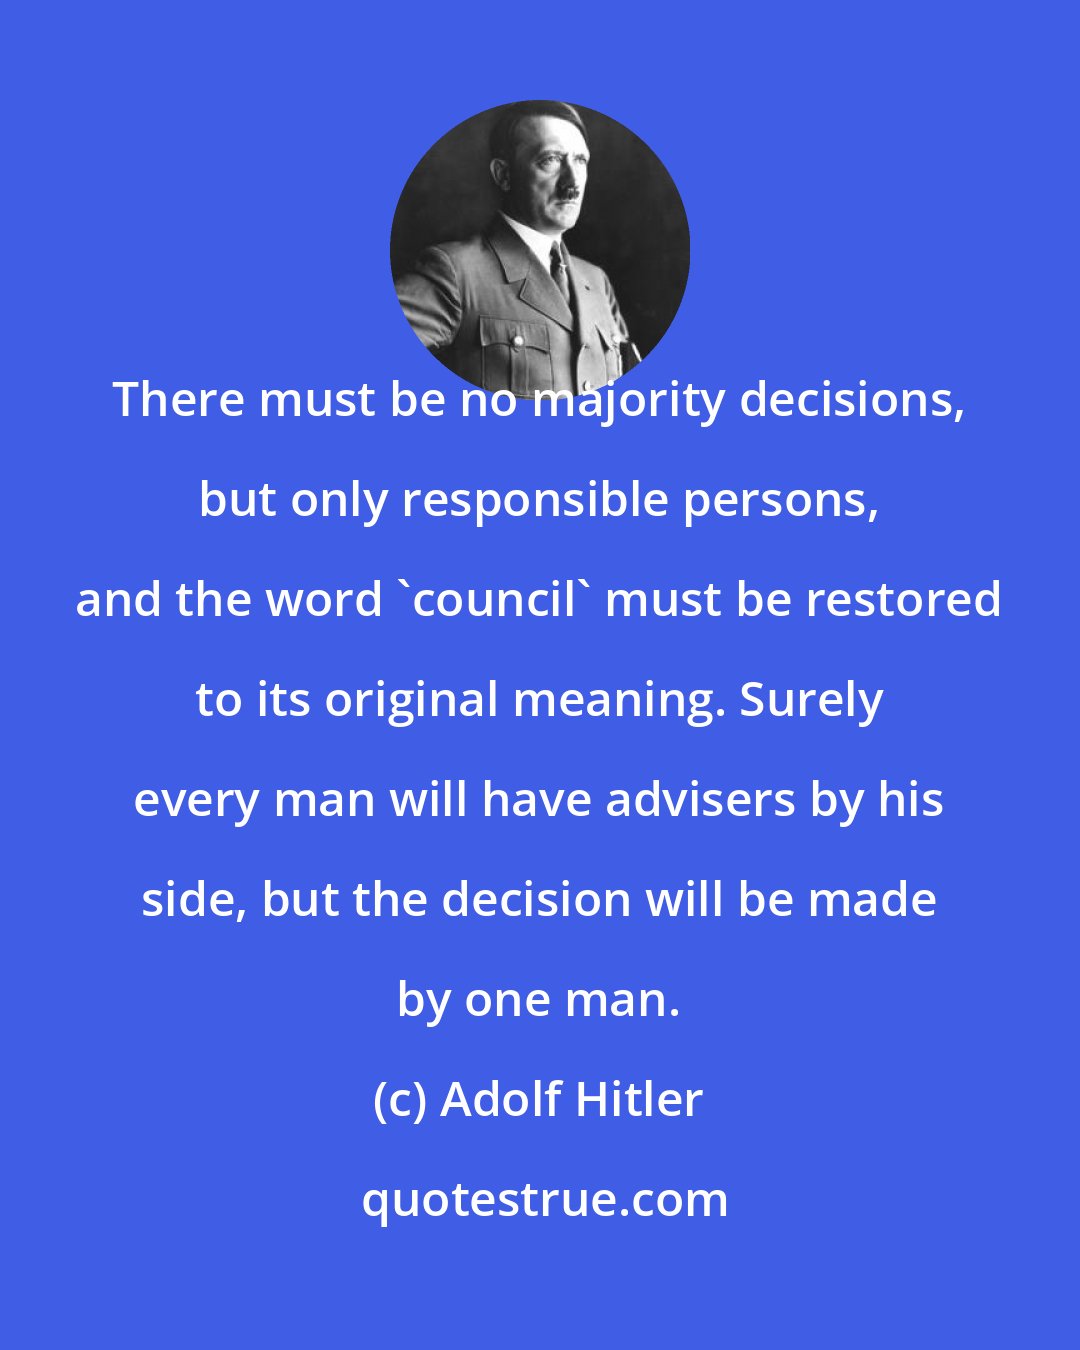 Adolf Hitler: There must be no majority decisions, but only responsible persons, and the word 'council' must be restored to its original meaning. Surely every man will have advisers by his side, but the decision will be made by one man.